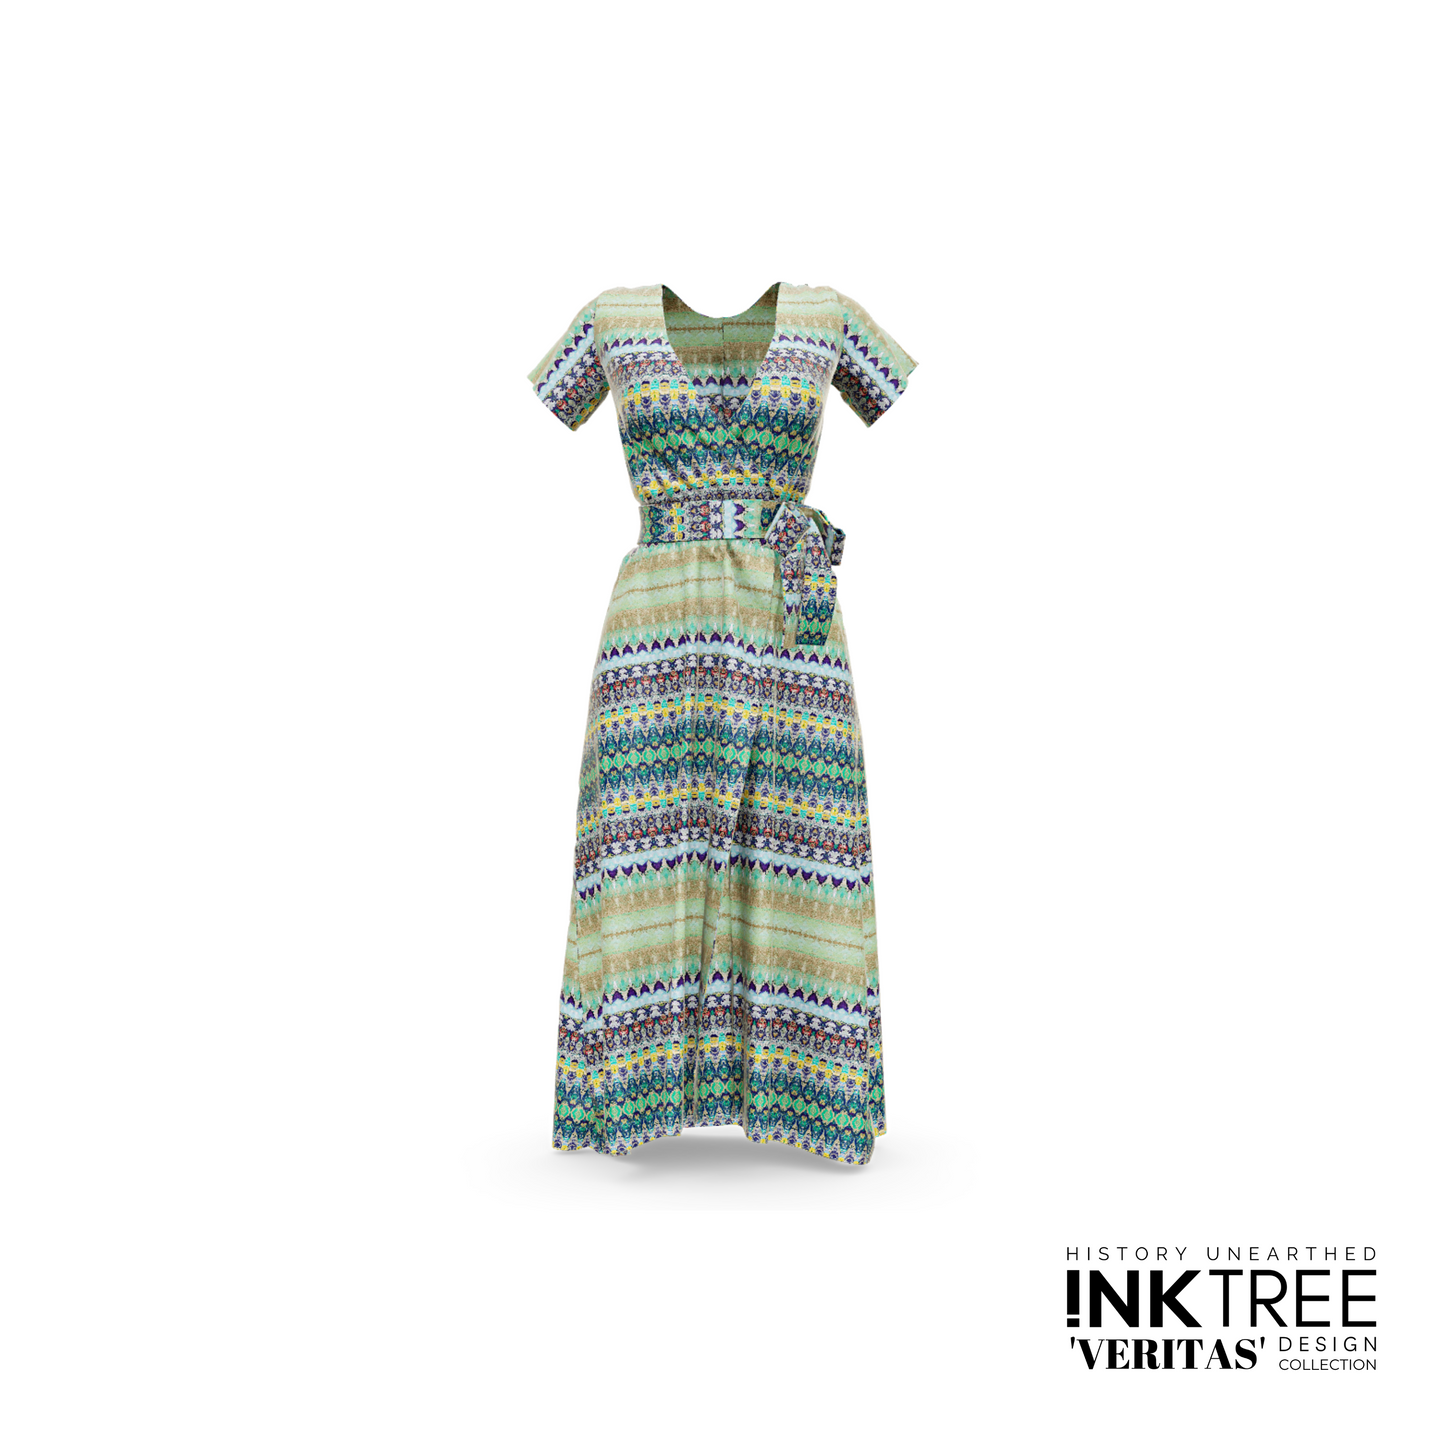 A dress with green, blue and black stripes on a white background.